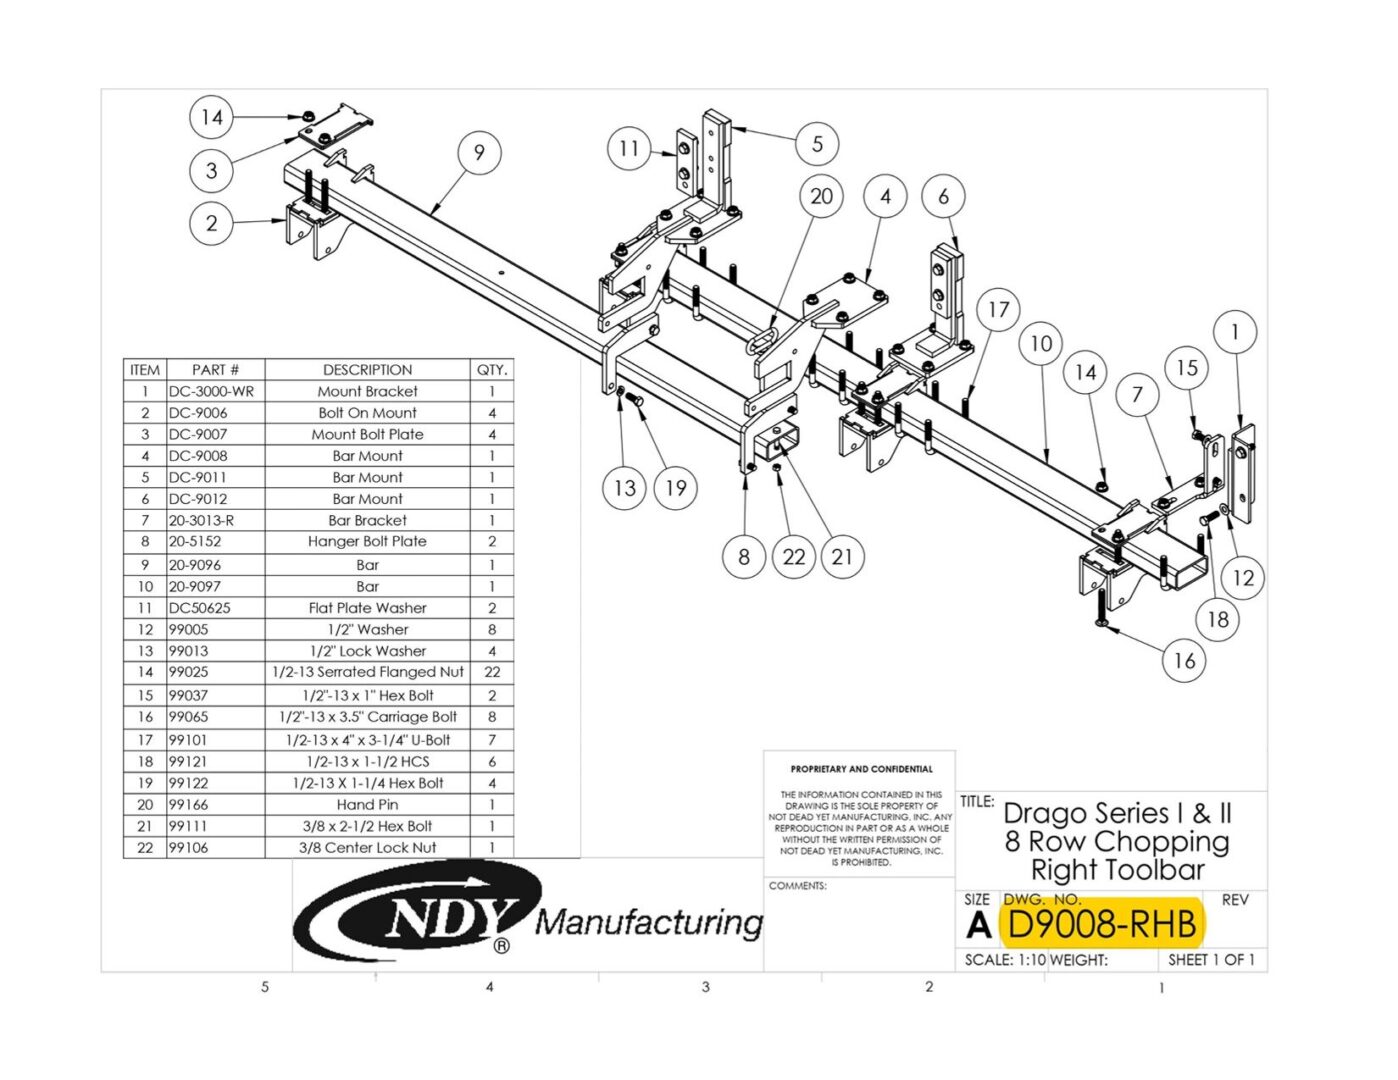 A diagram showing the parts of a Stalk Stomper Right Toolbar for Drago Series I & II 8 Row Chopping Corn Head machine.